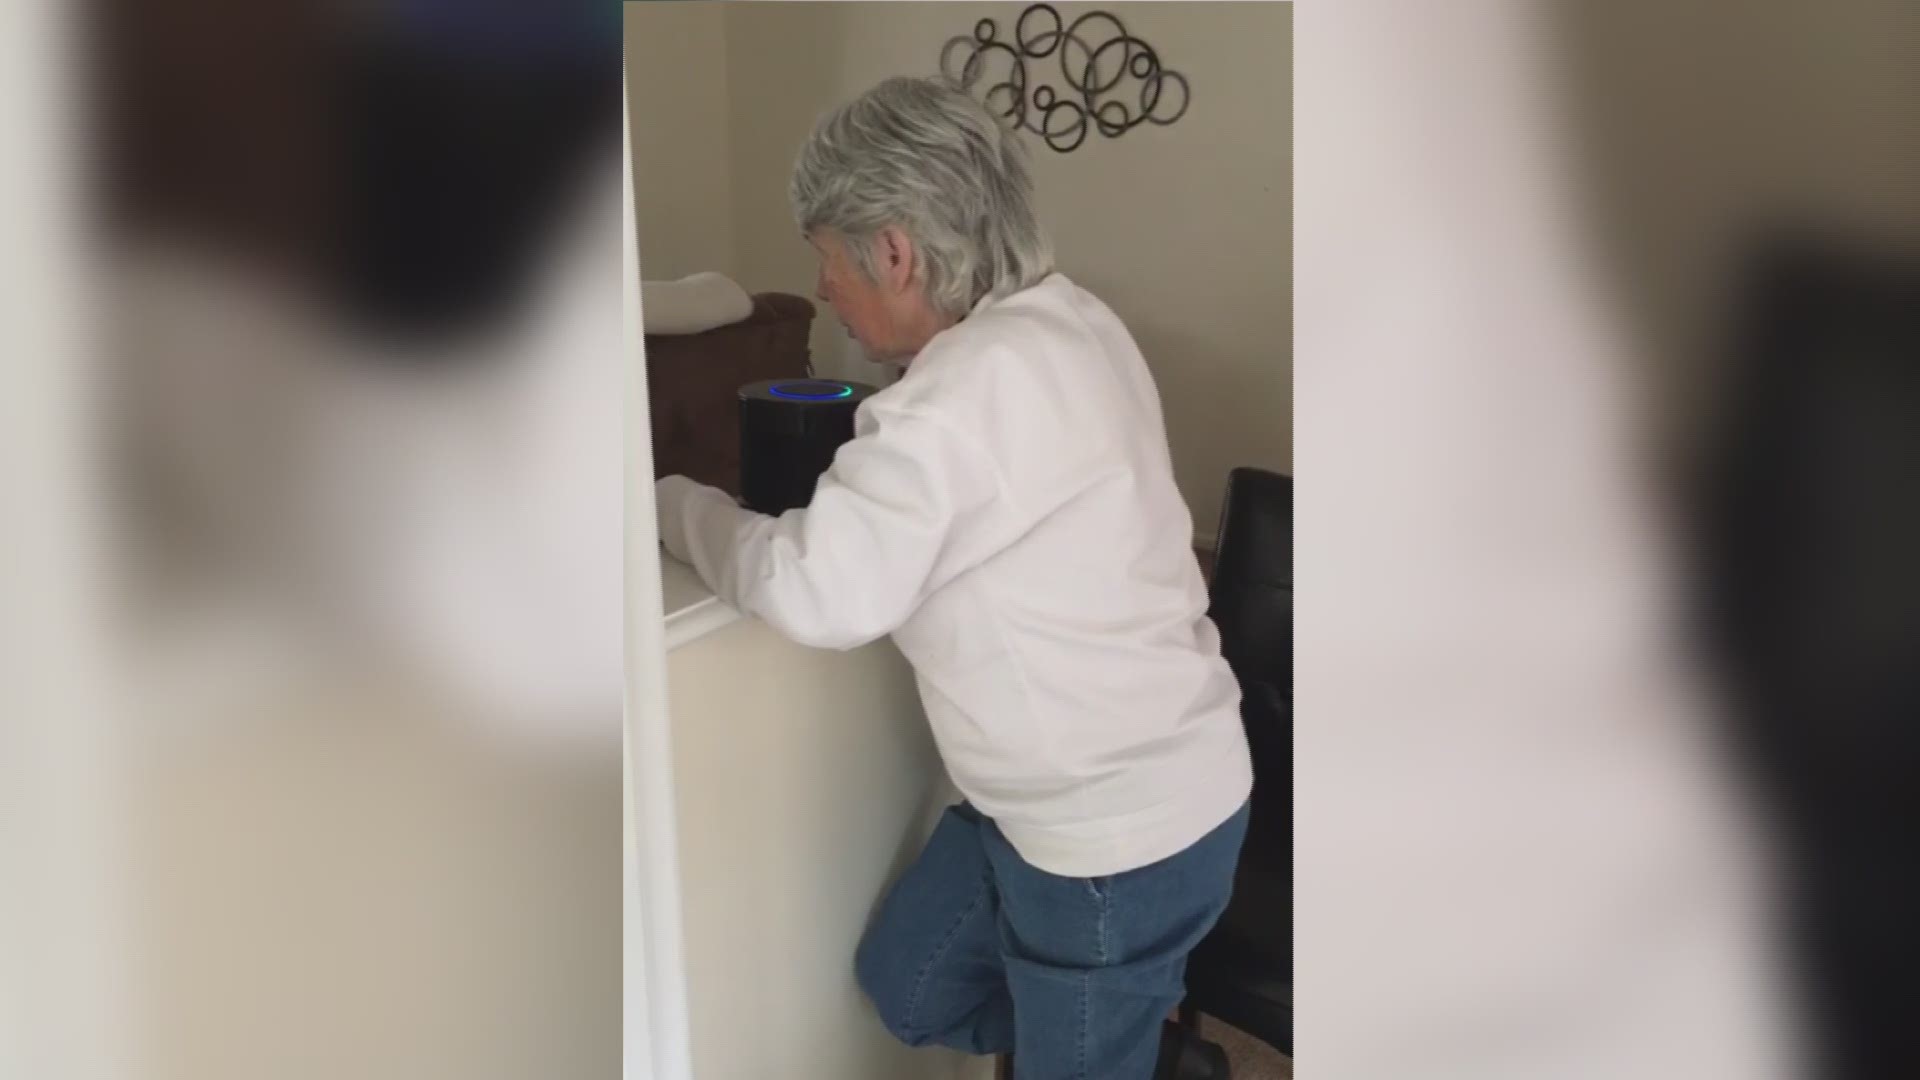 A Connecticut great-grandmother just can't quite understand how to use Amazon's 'Alexa'